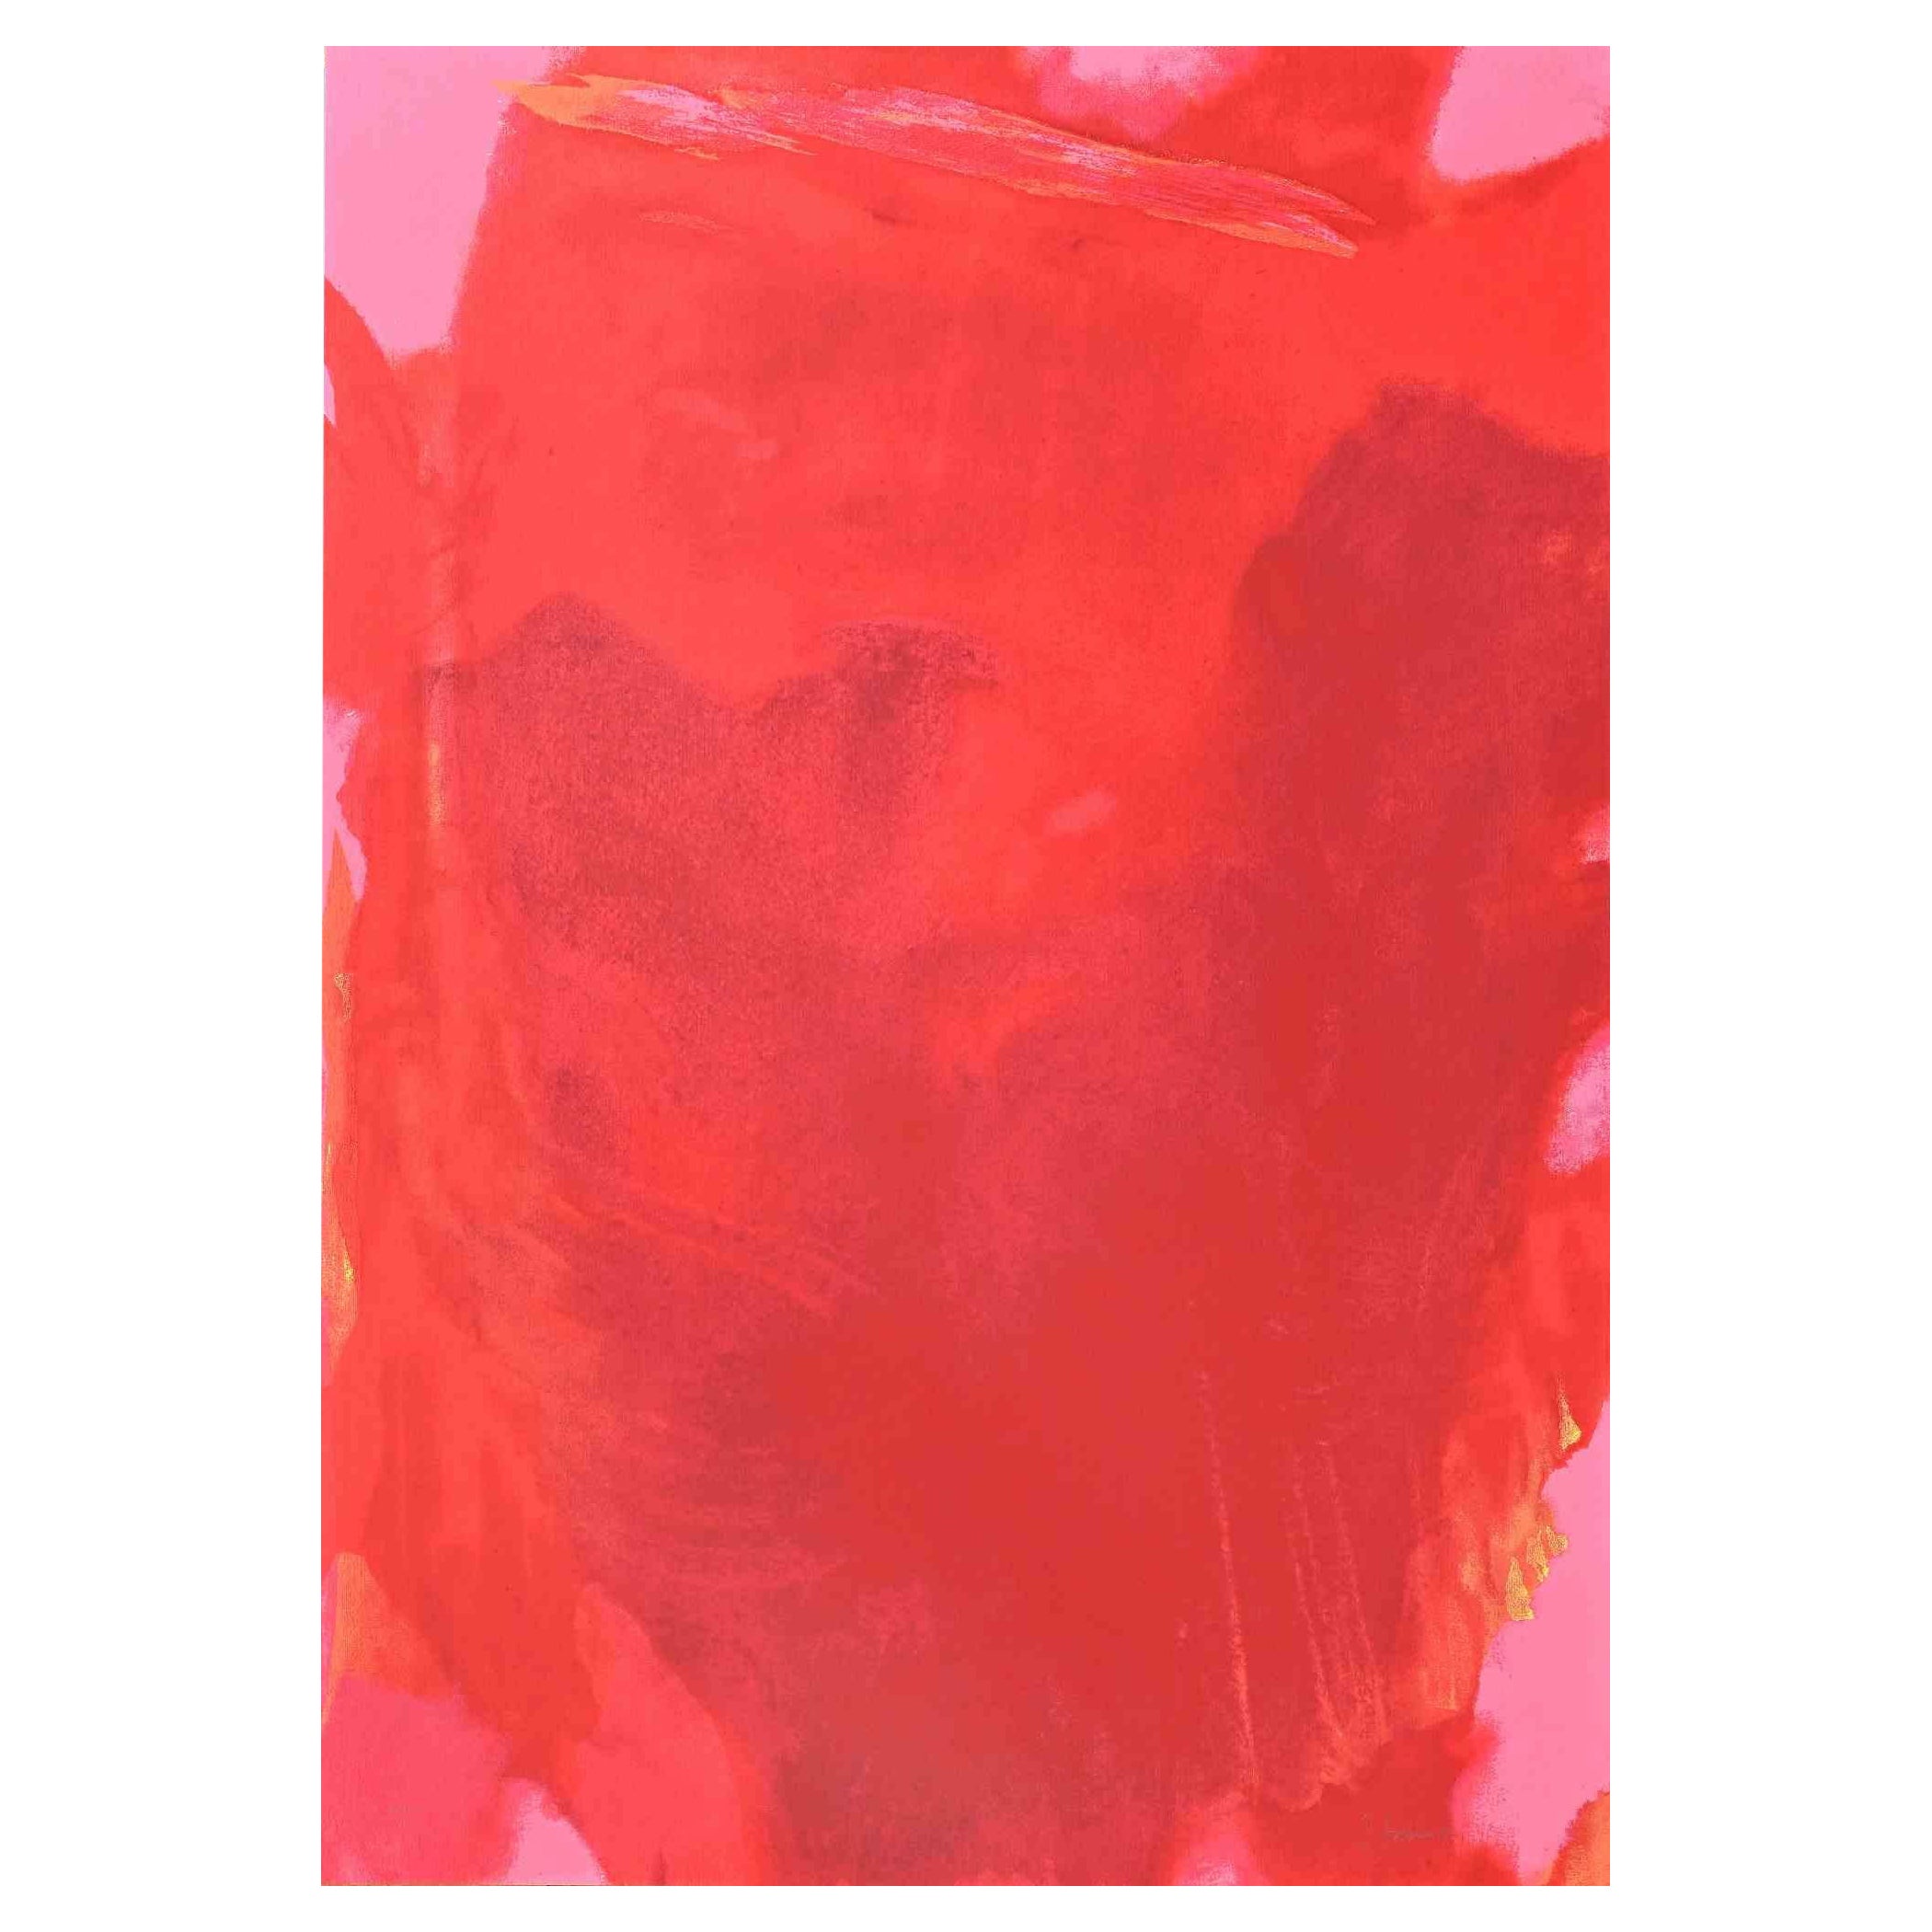 Italo Bressan Abstract Print - The Visible of the Invisible - Red Composition - by I. Bressan - 1989